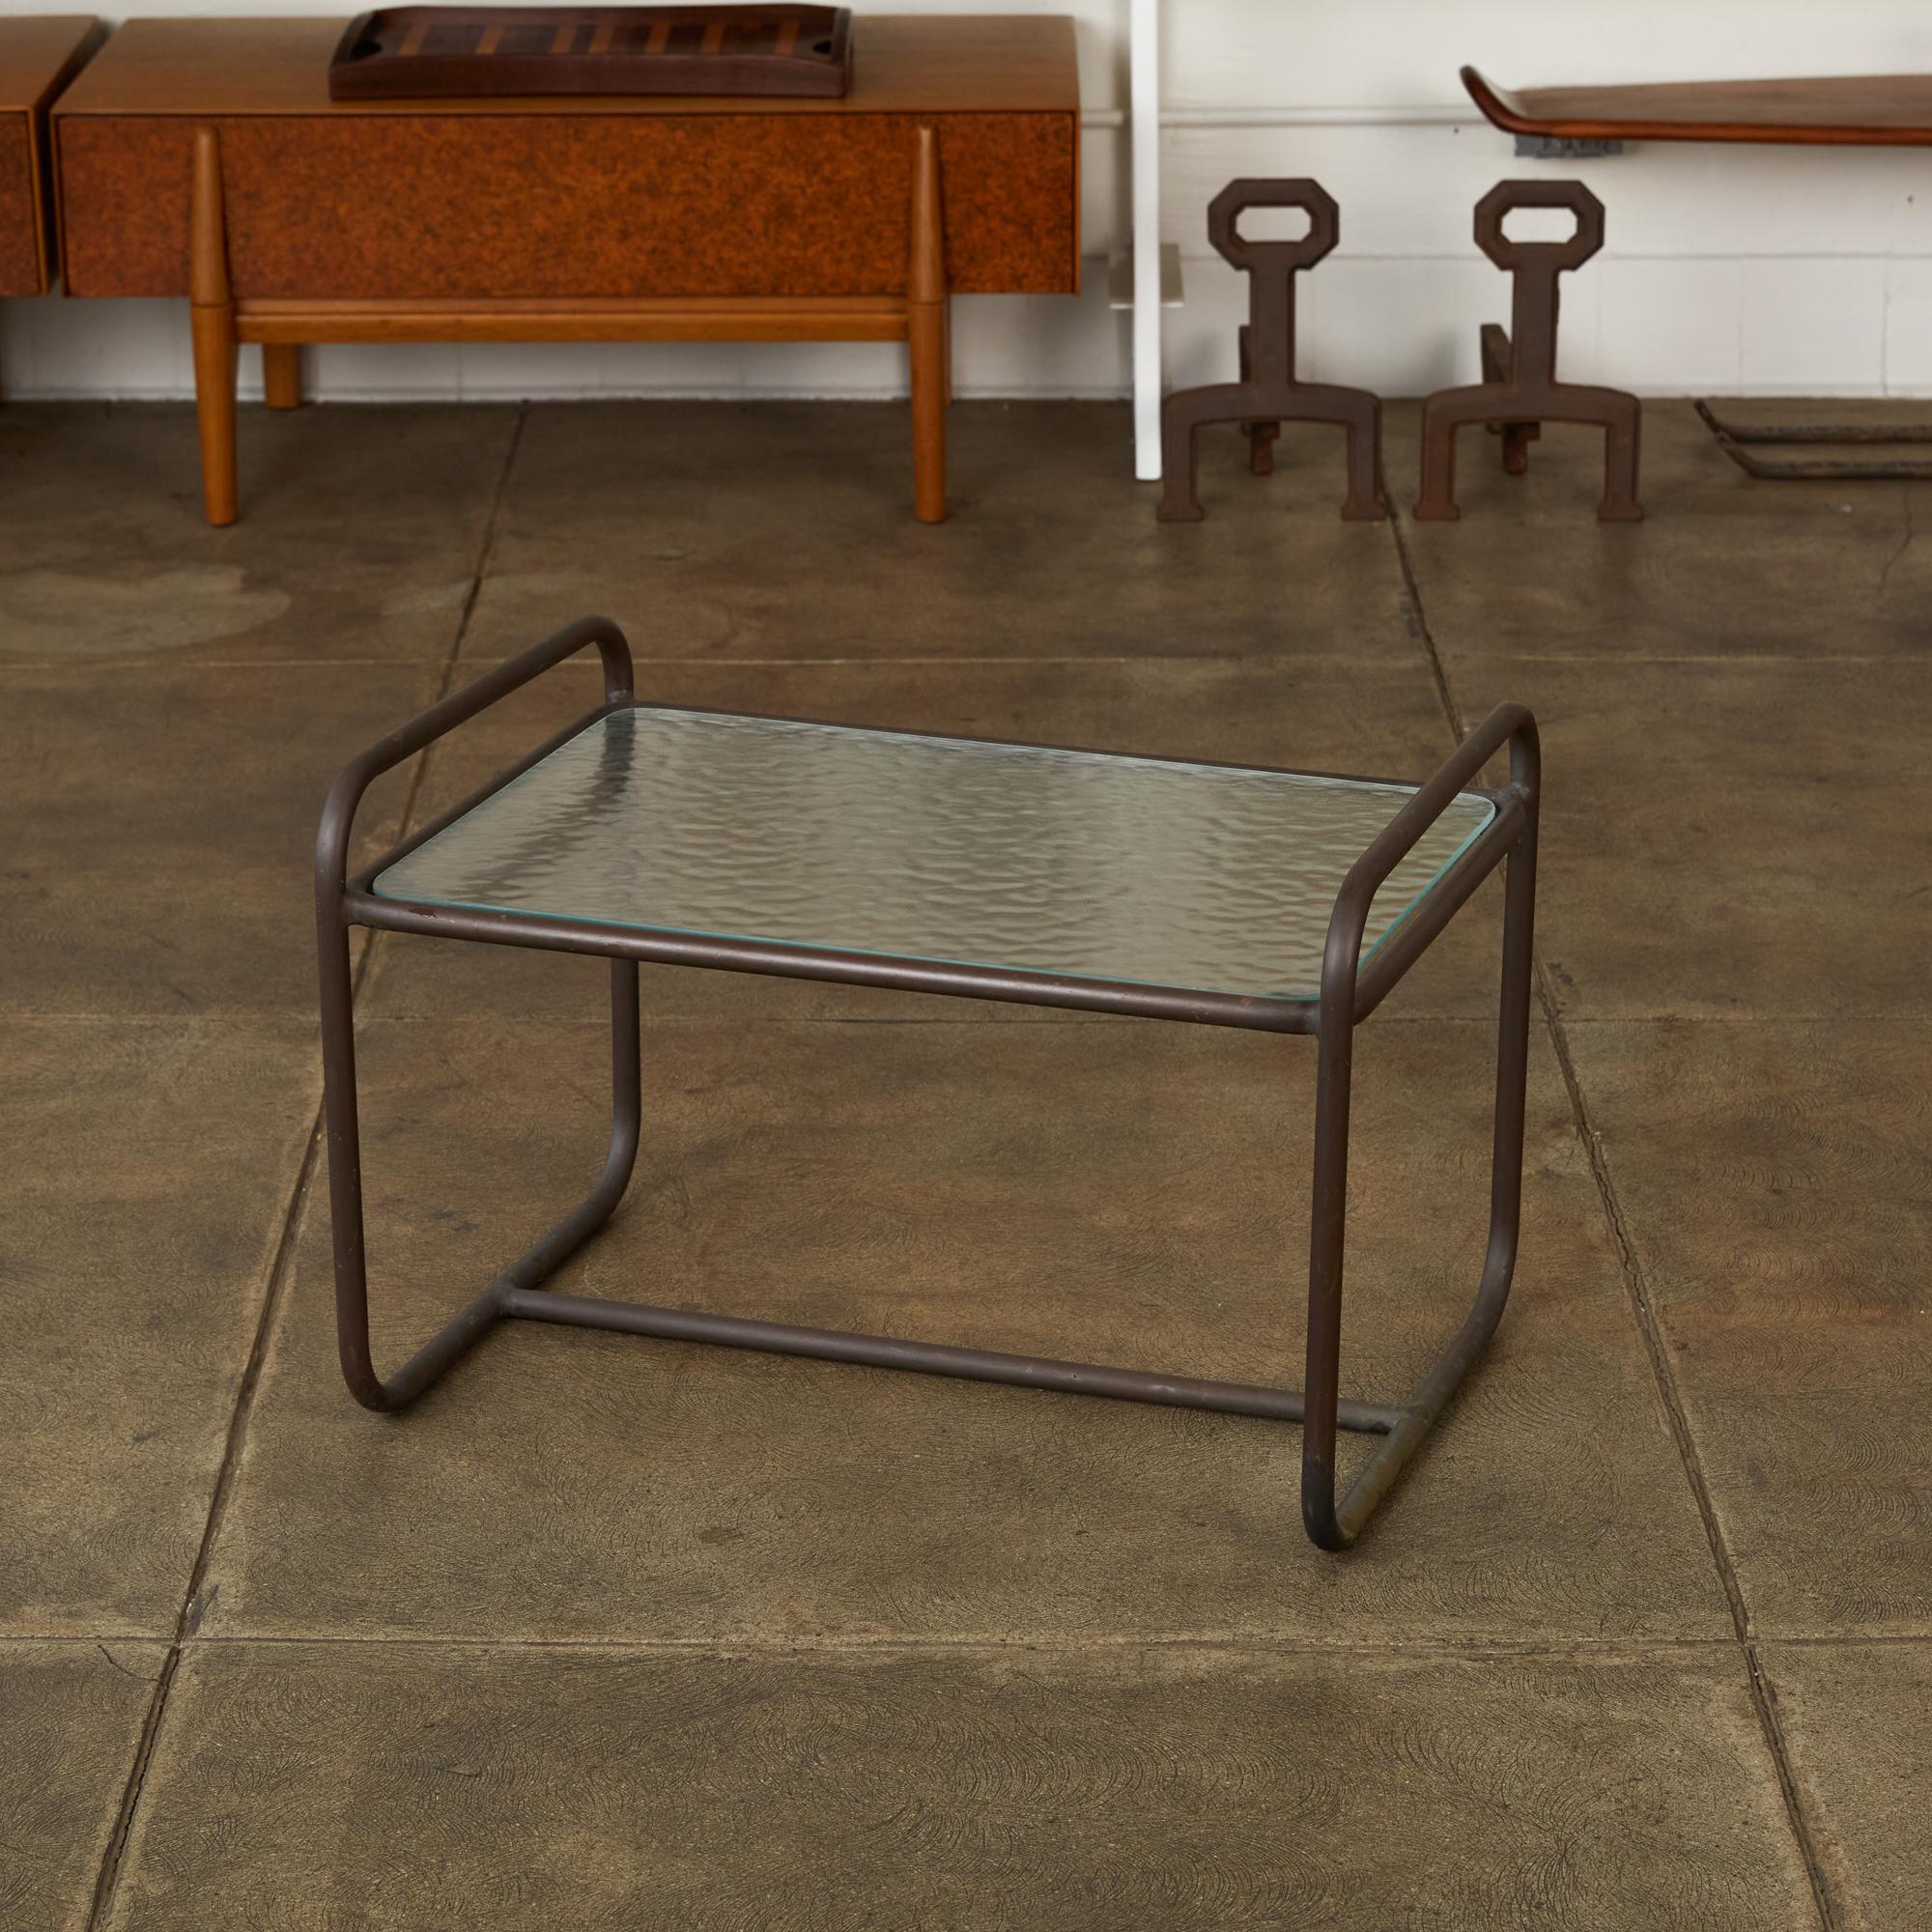 Patio side table designed by Walter Lamb and produced by Brown Jordan. The table frame is bronze tubing with a verdigris patina with an inset hammered glass tabletop. Two curved rails form the legs and create the “handles” on either side of the